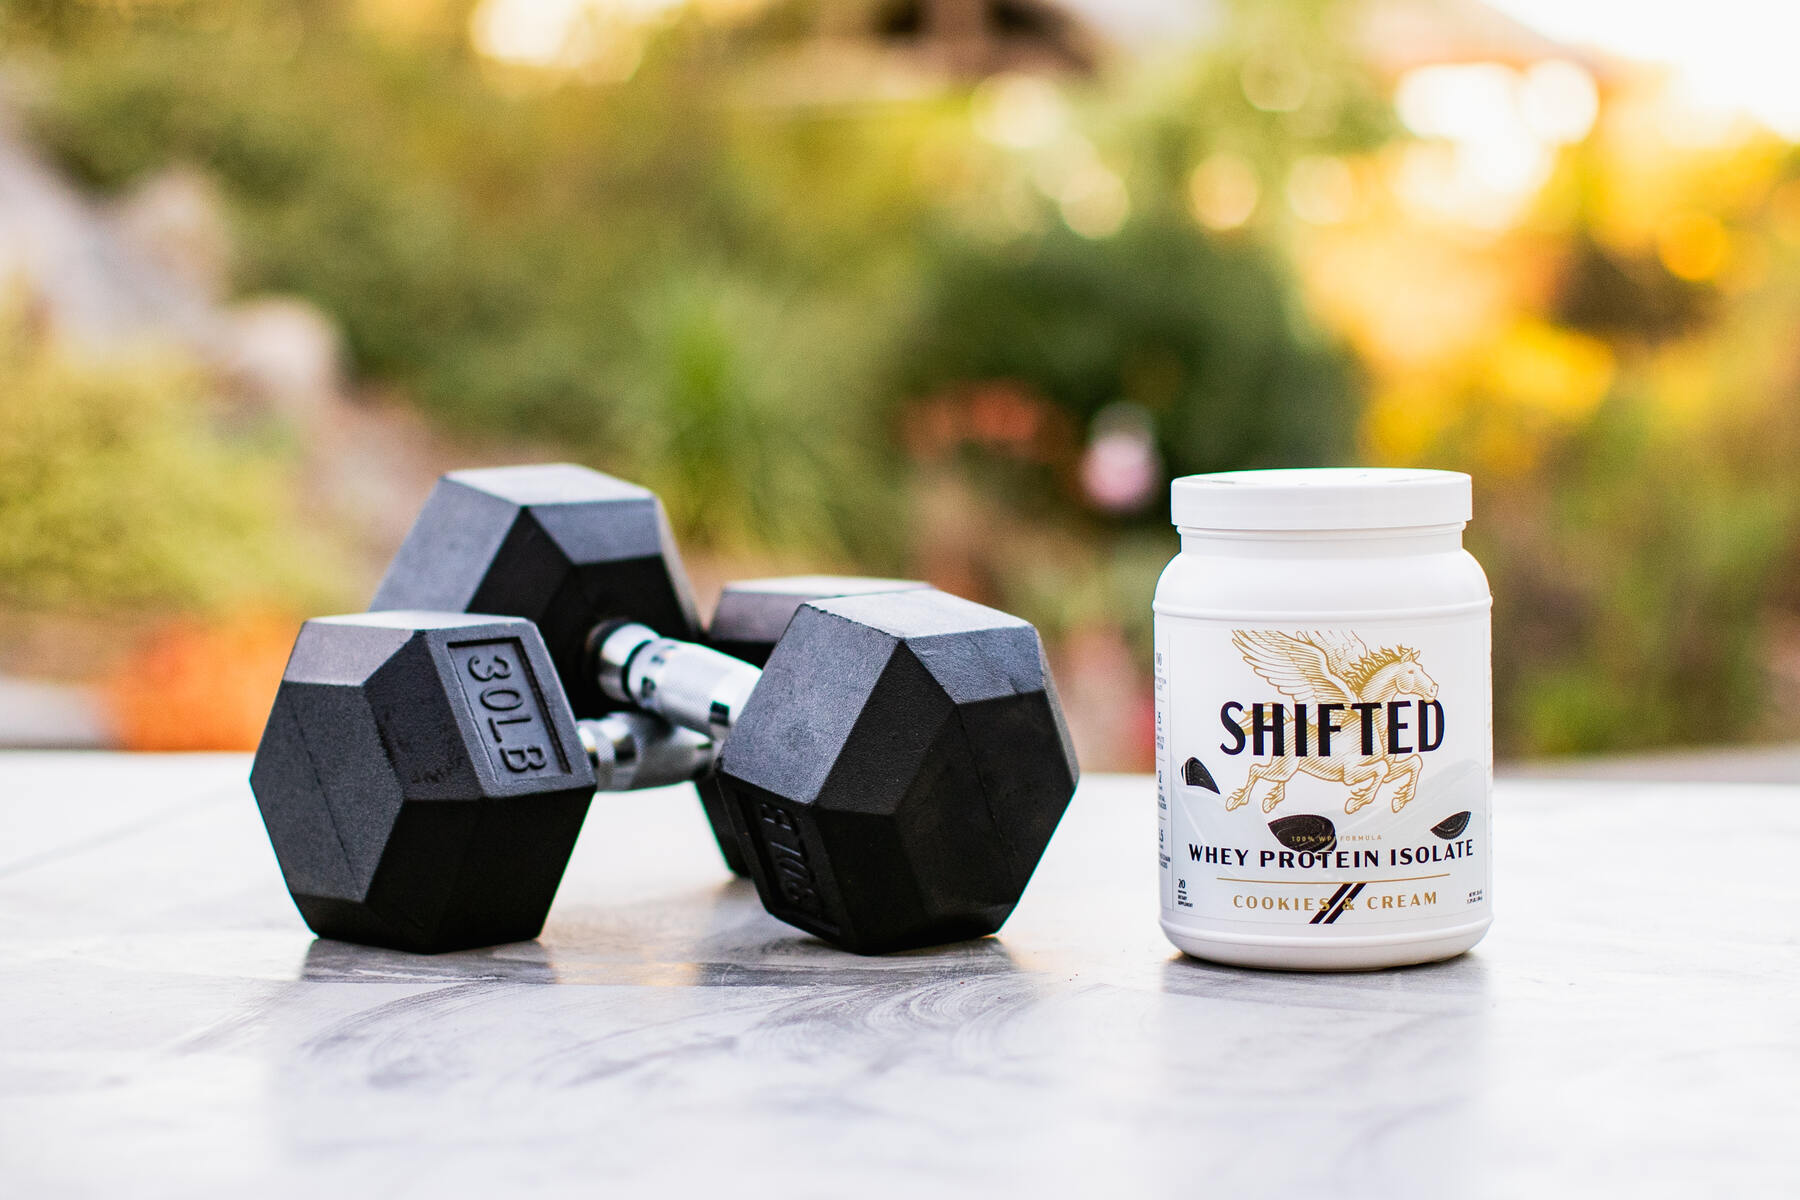 Shifted whey protein isolate next to 30lb dumbbells on a gray concrete table outside